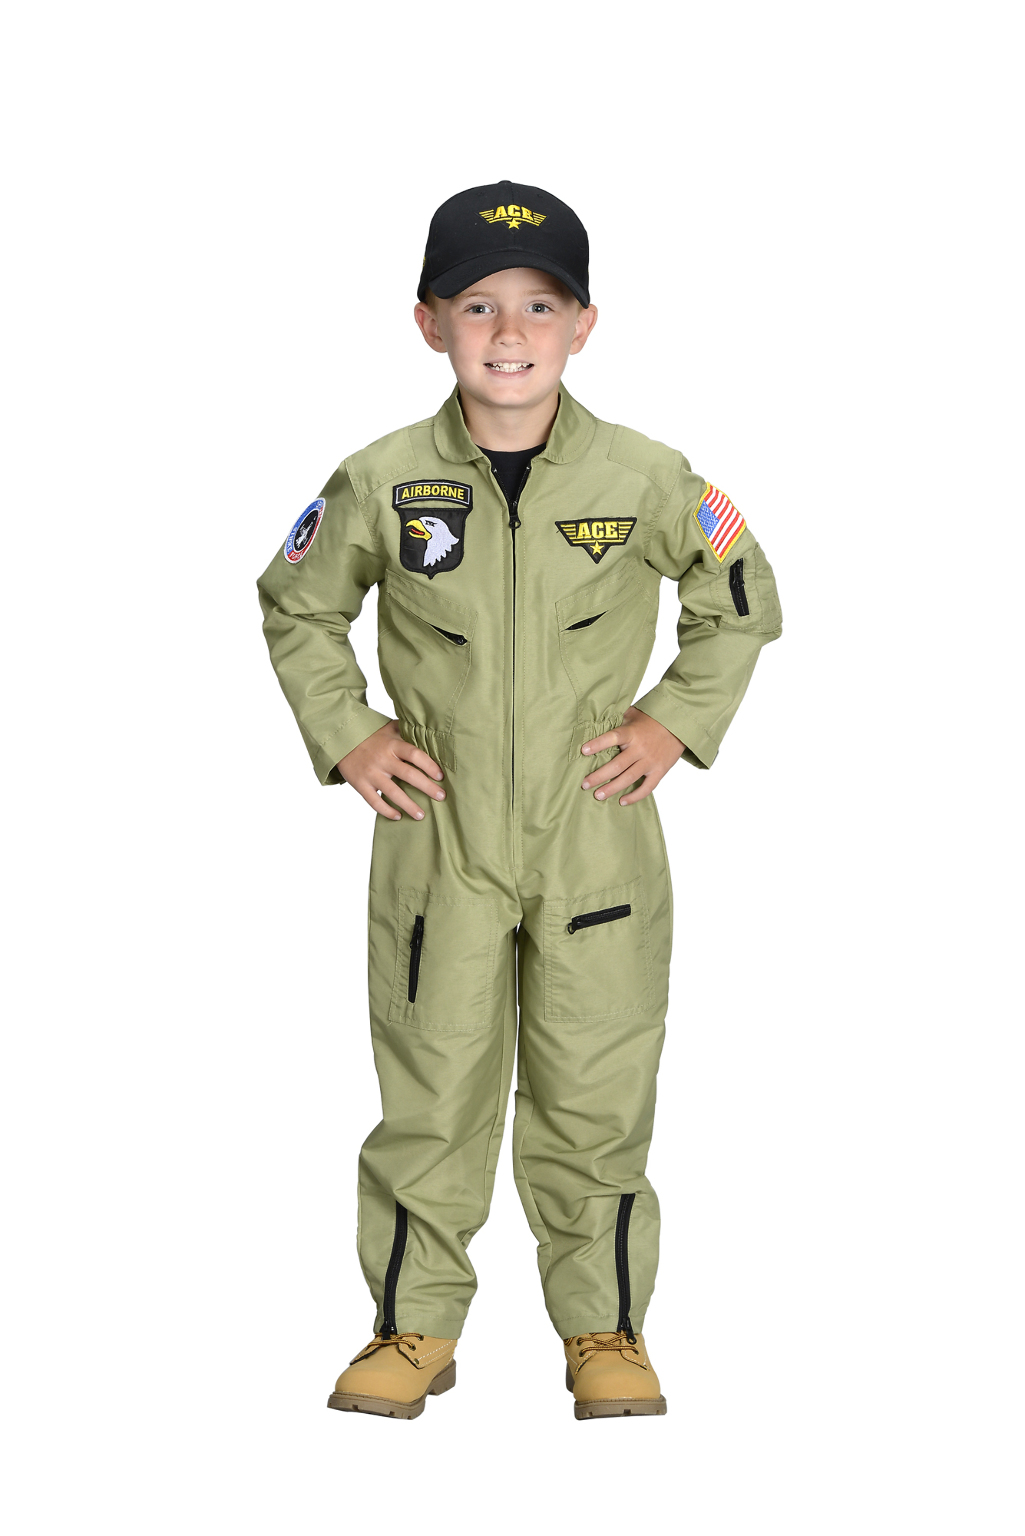 Jr. Fighter Pilot Suit, With Embroidered Cap, Size 4 / 6(6x.03)